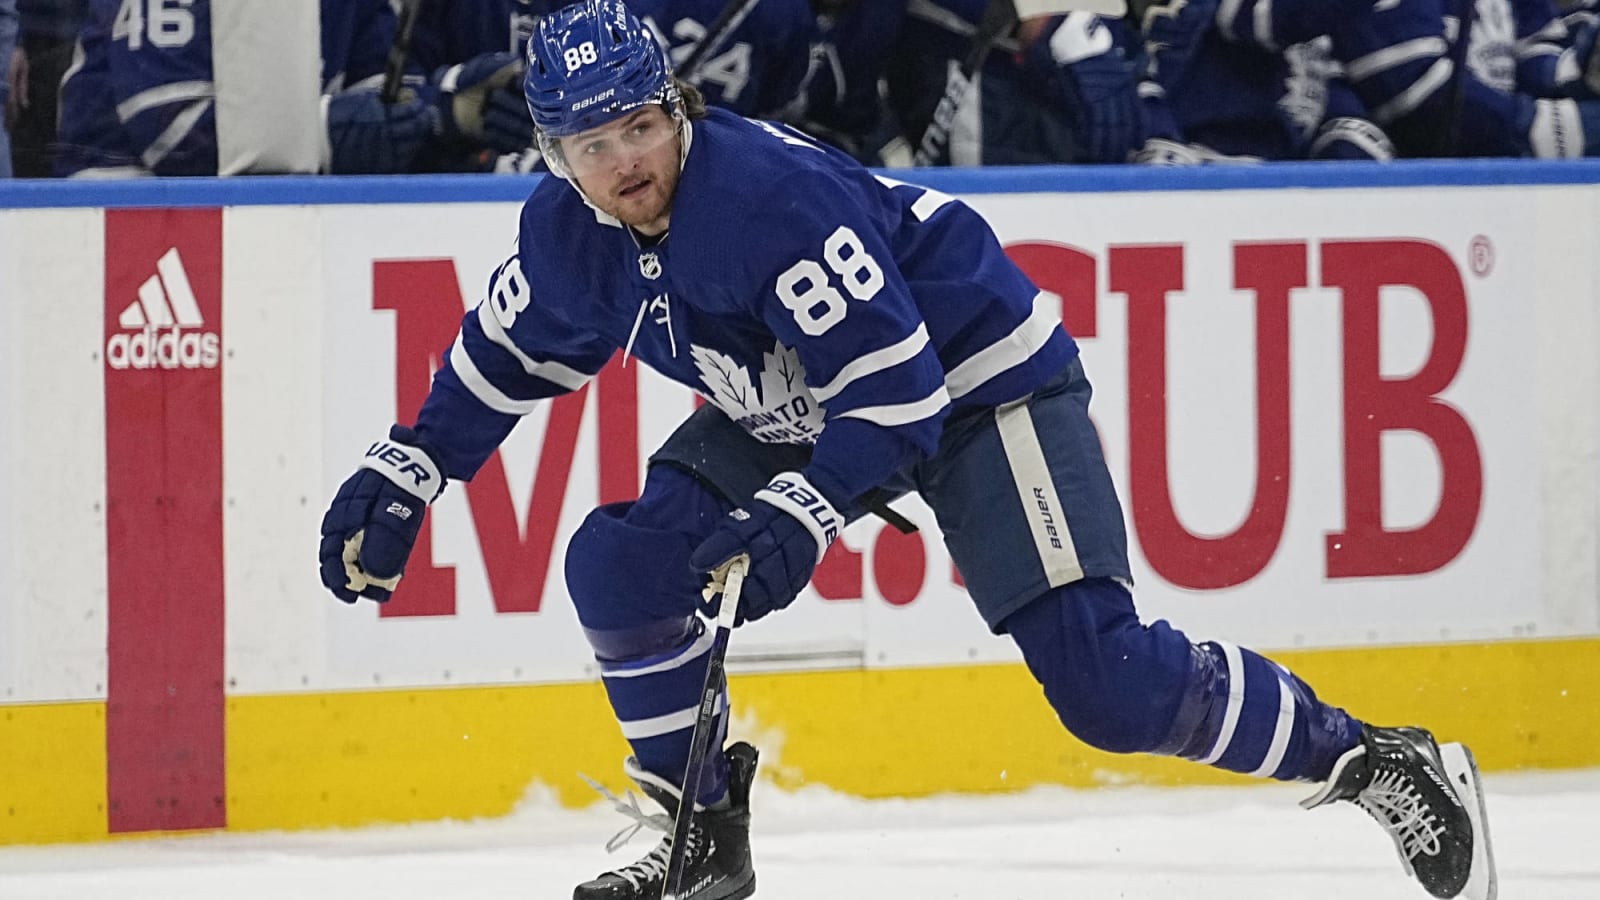 William Nylander shows self-awareness as Maple Leafs forward aims to improve as a player